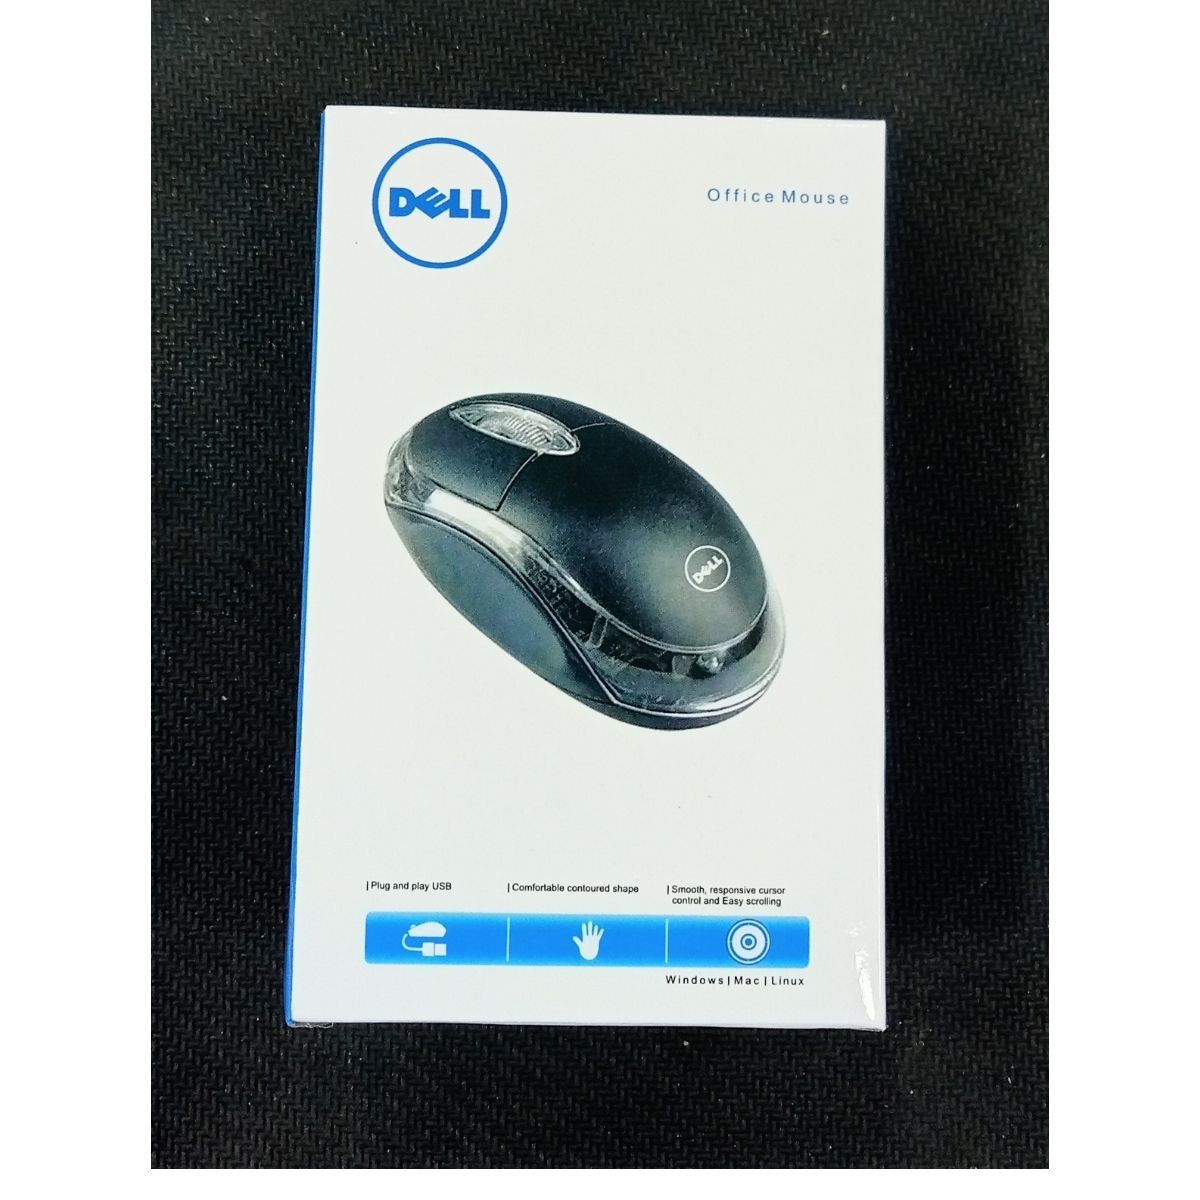 Dell Standard Office Mouse BD